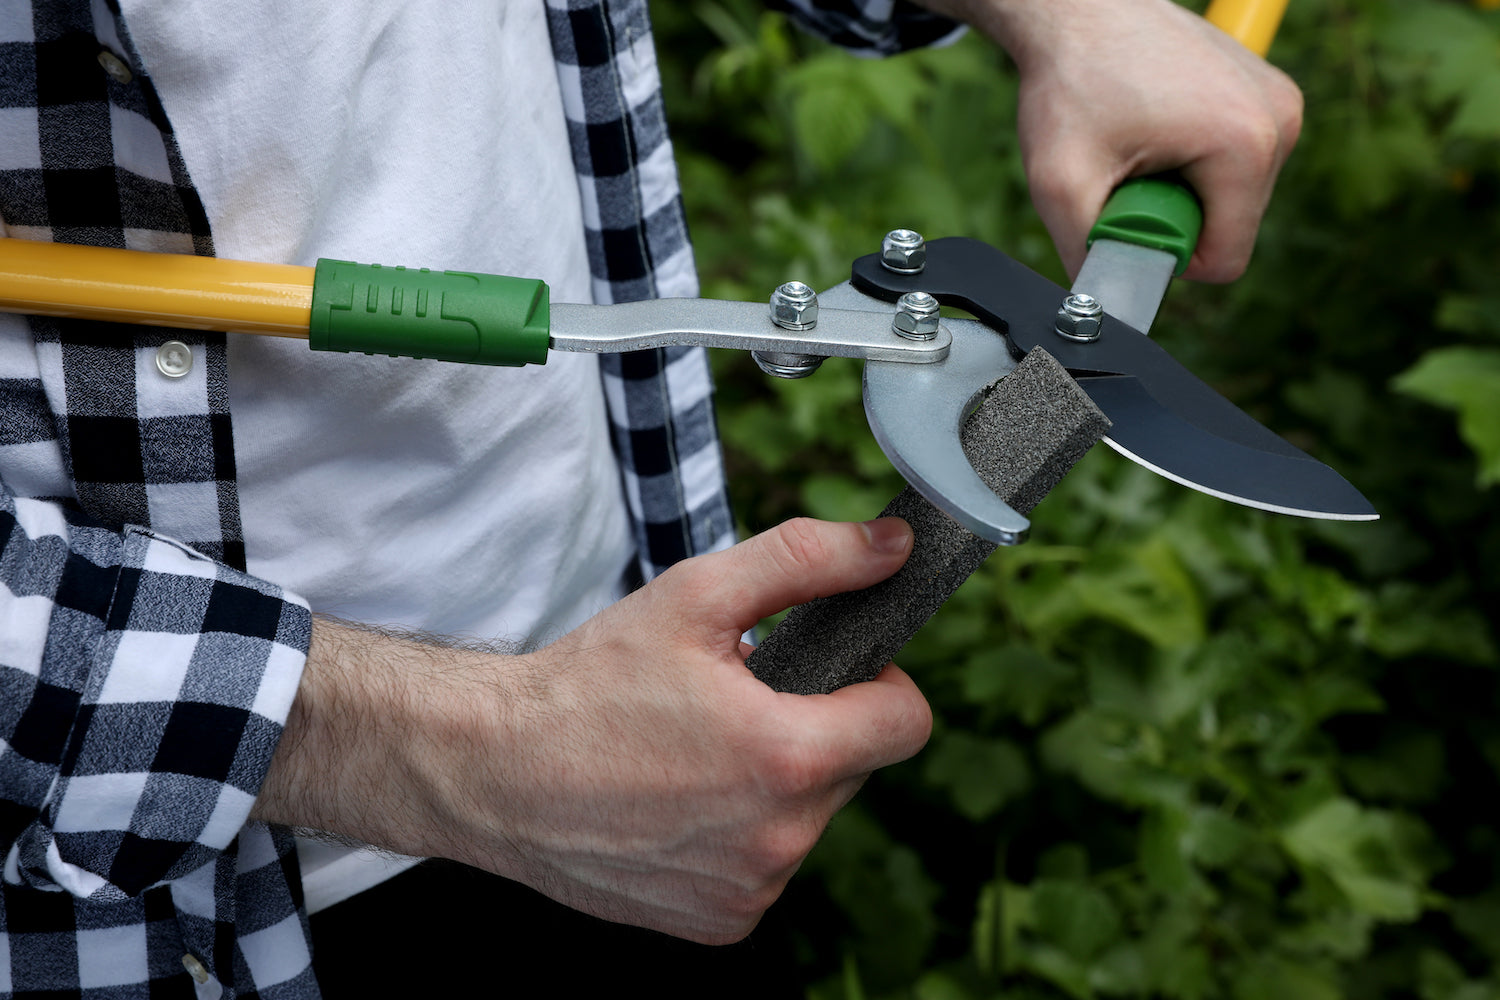 How to Sharpen Your Pruners